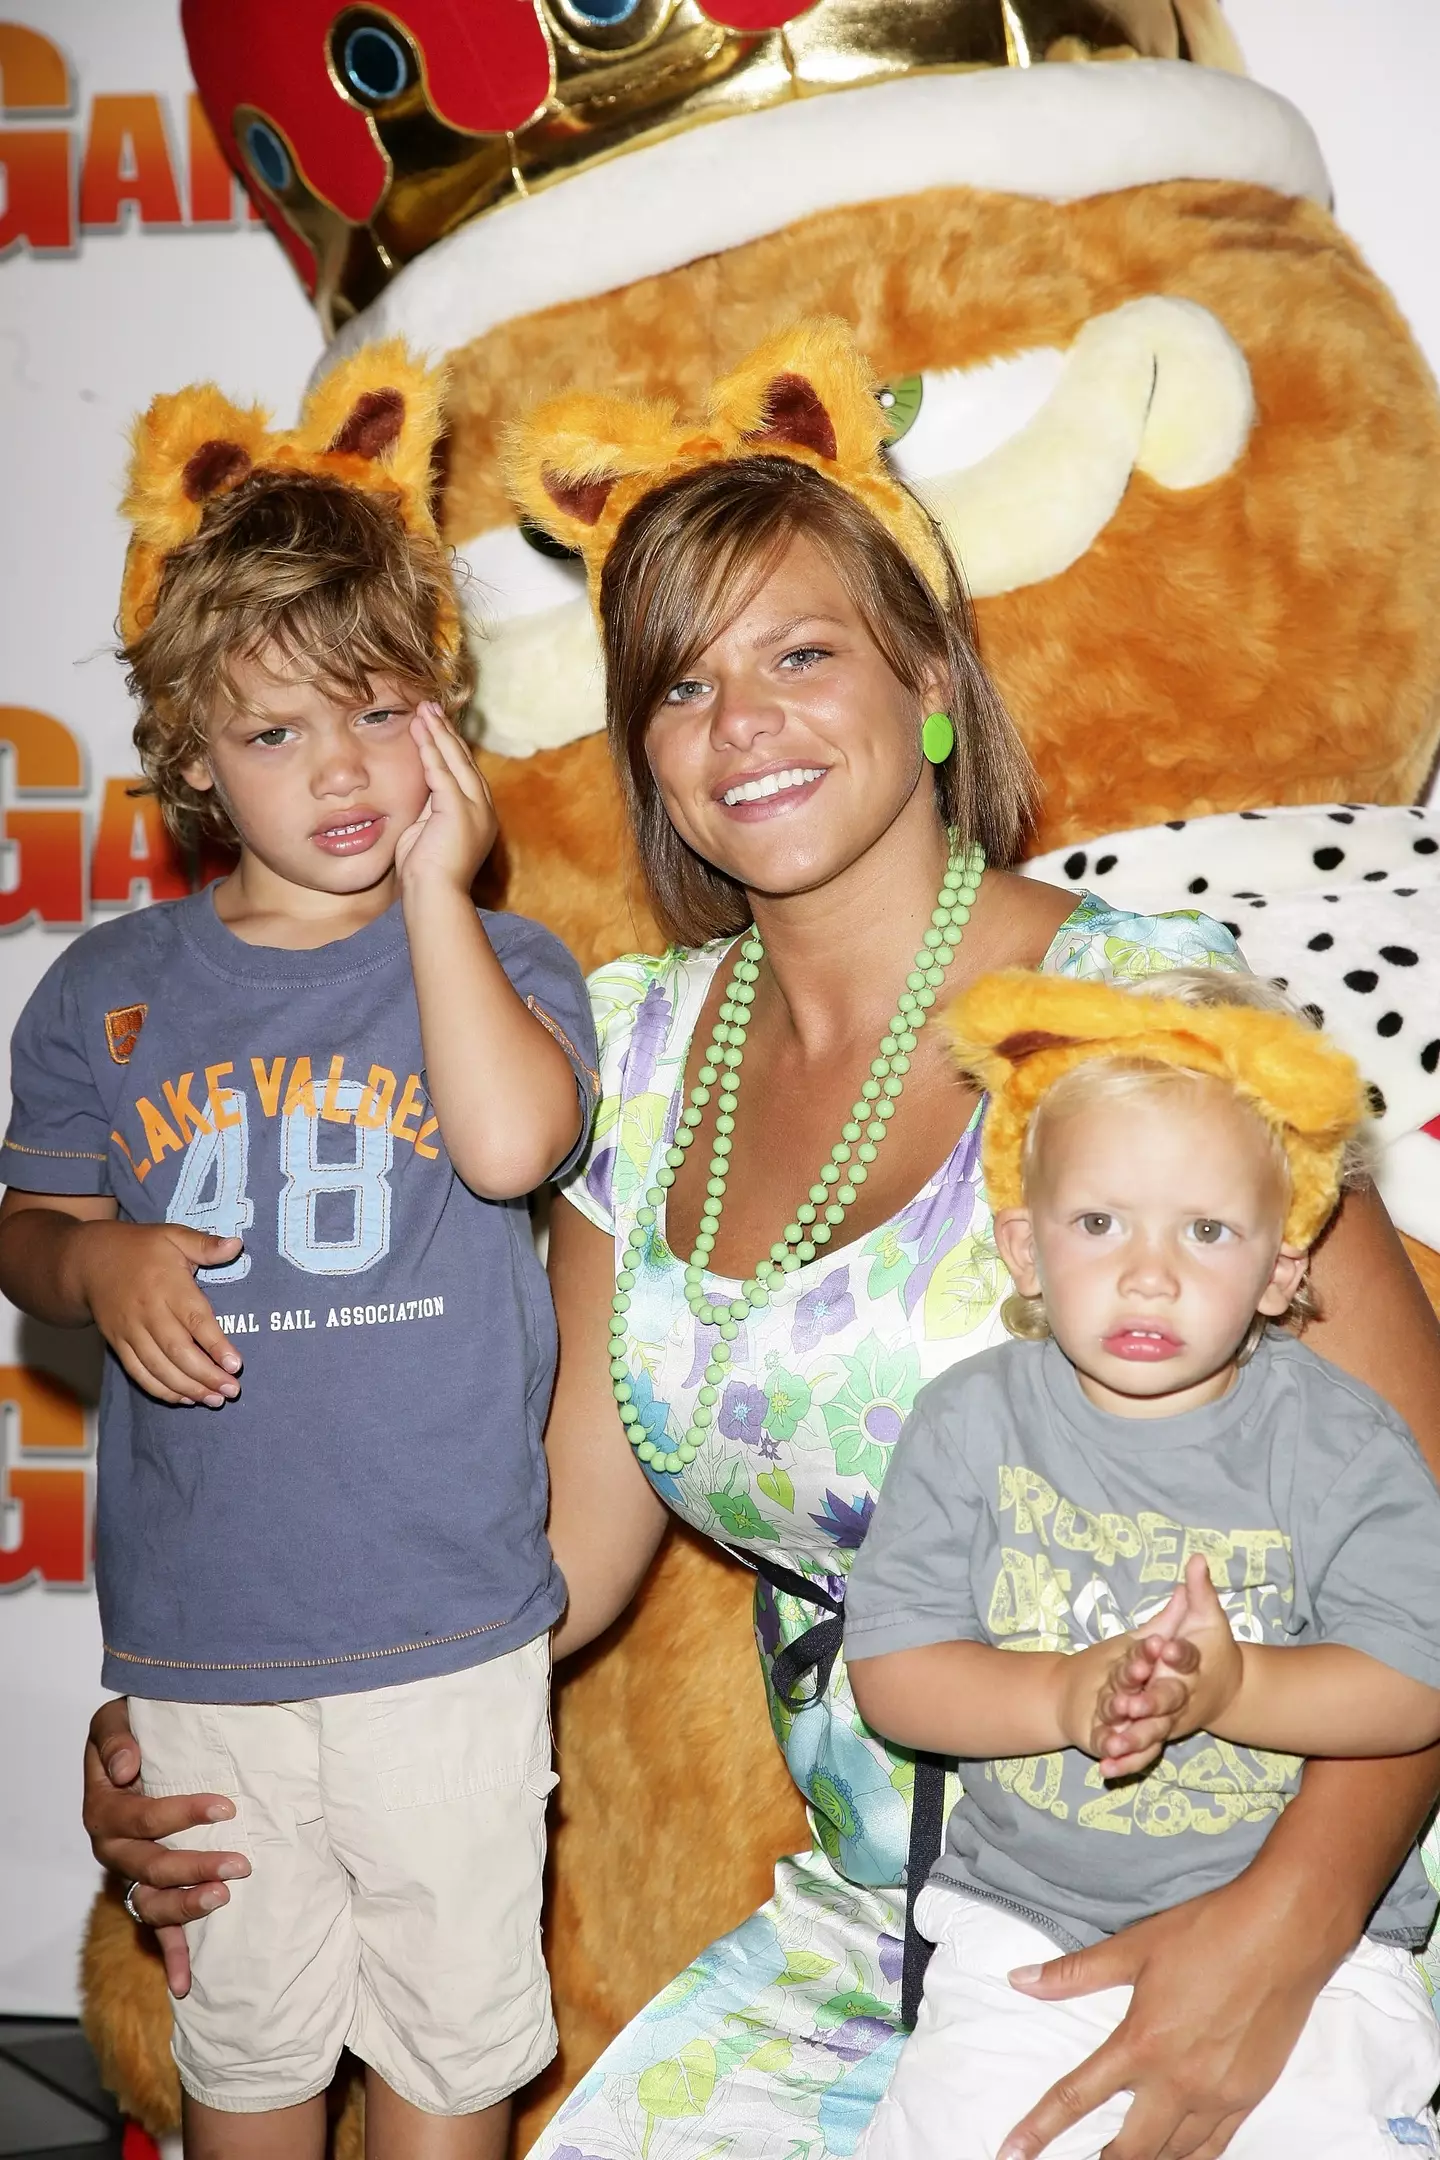 Big Brother star, Jade Goody, sent her two sons a heartfelt final message before she passed away.